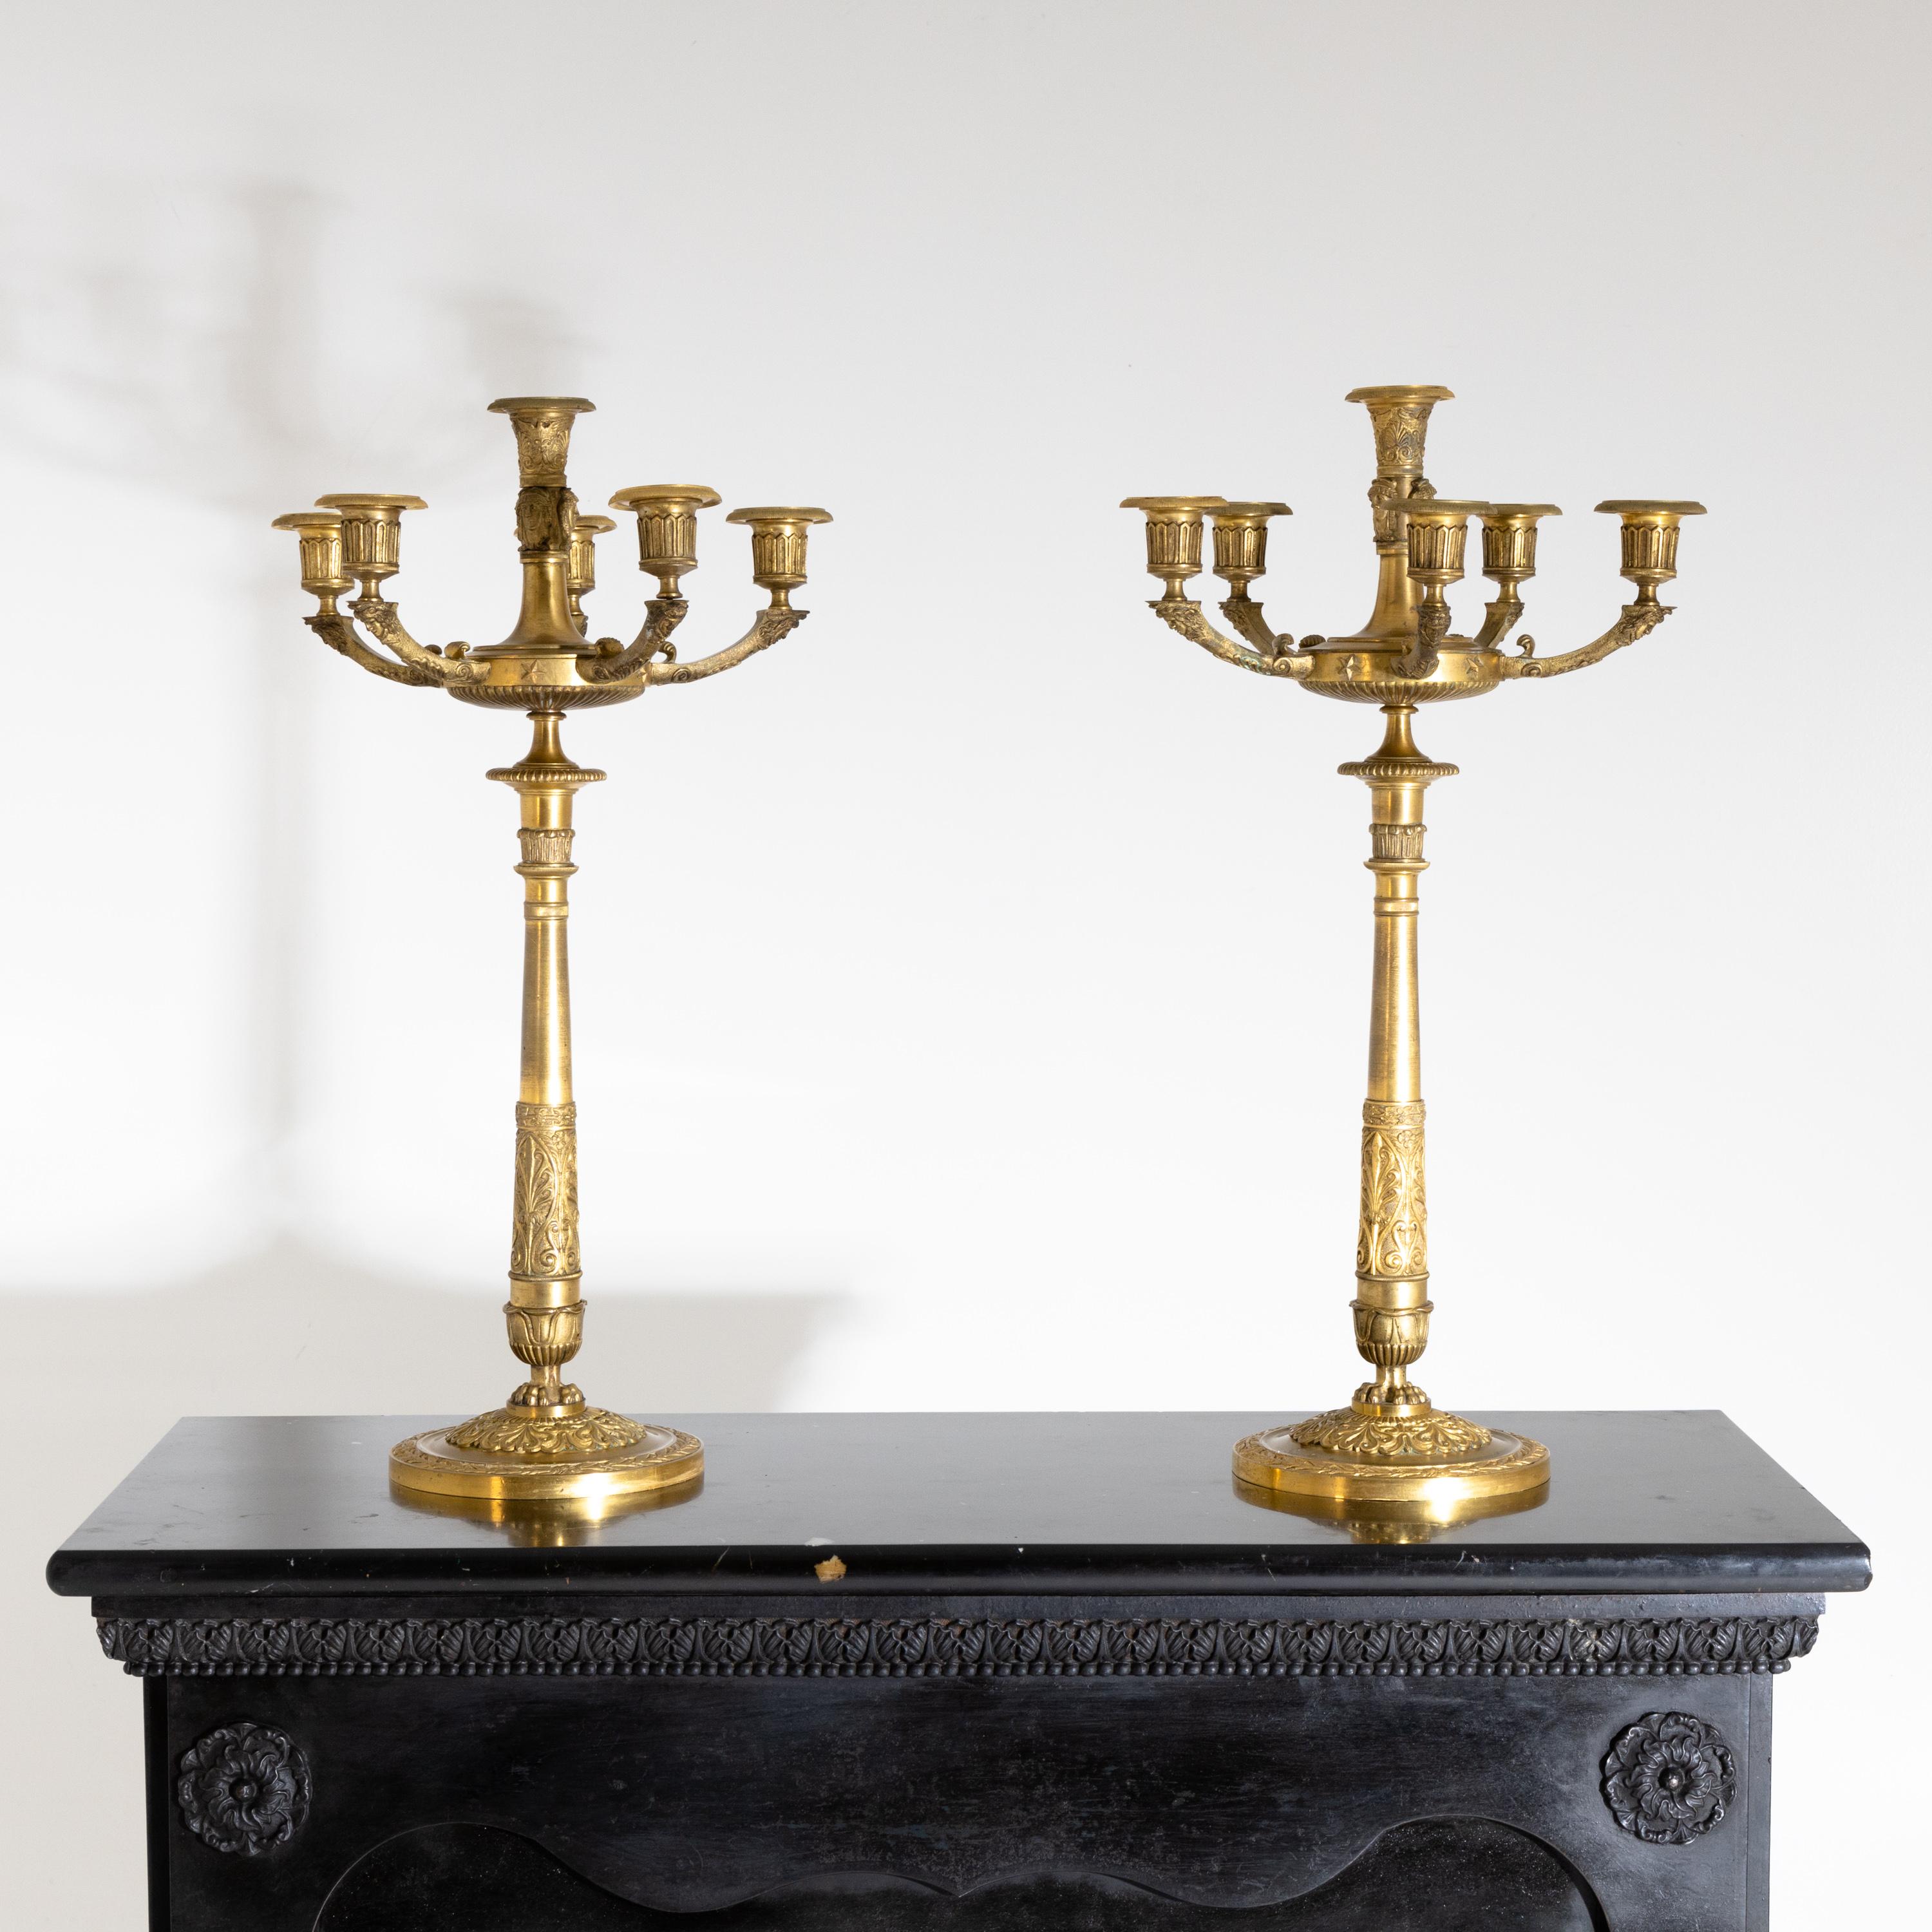 Pair of Empire girandoles of fire-gilt bronze, on a round base with acanthus leaf decoration and six spouts. The candelabra arms and central spout are decorated with mascarons and tendrils.